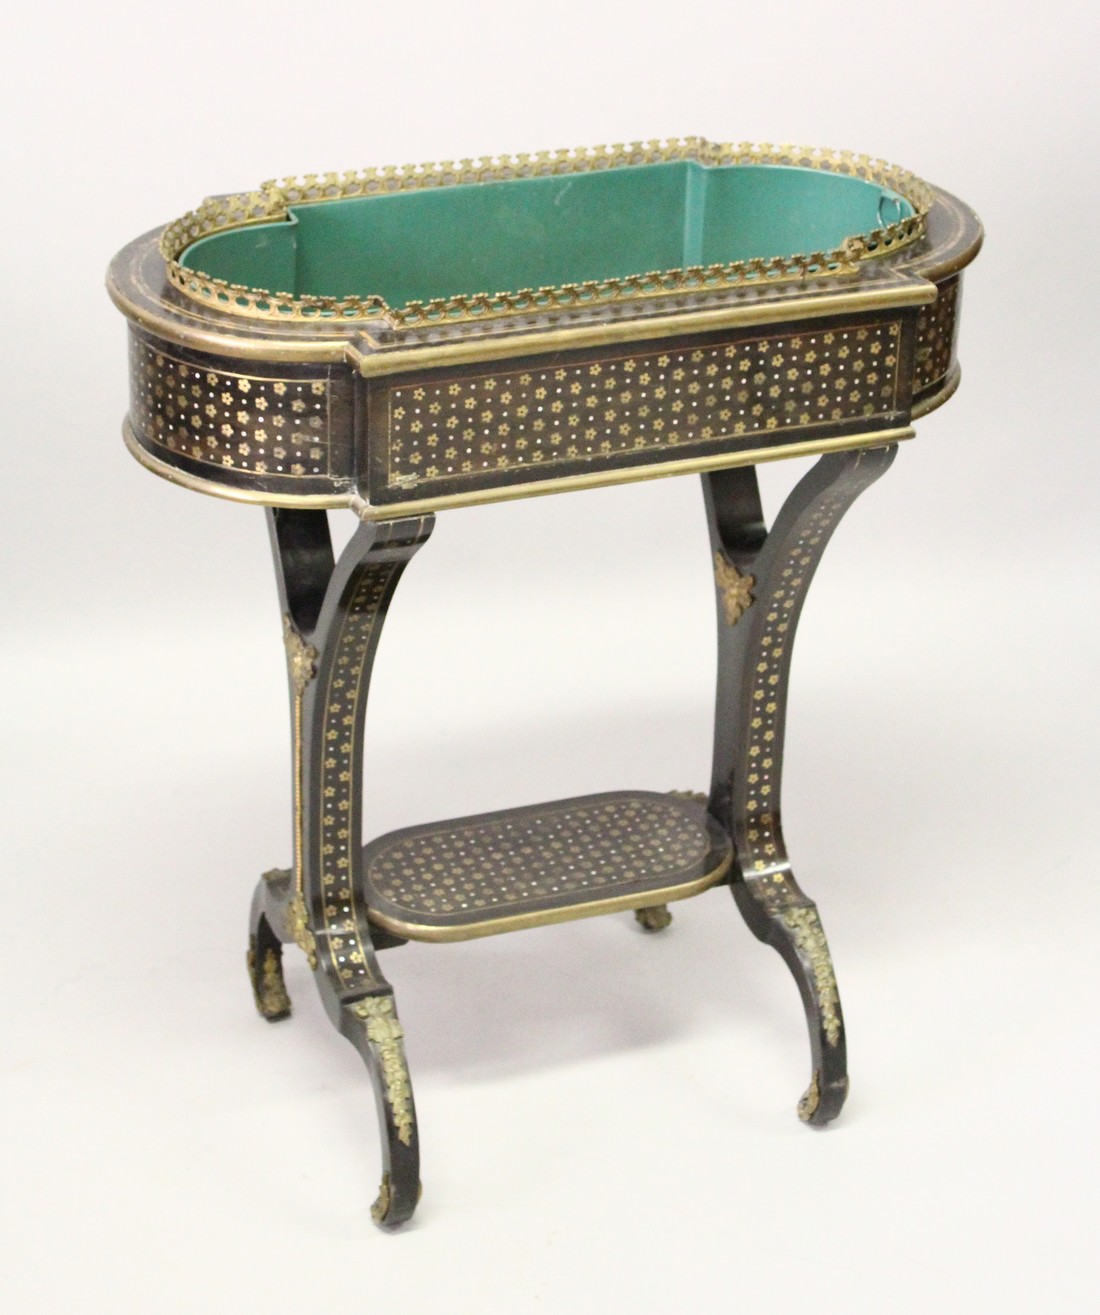 A VERY GOOD FRENCH 18TH /19TH CENTURY INLAID PLANTER, with brass grill, metal liner on curving end